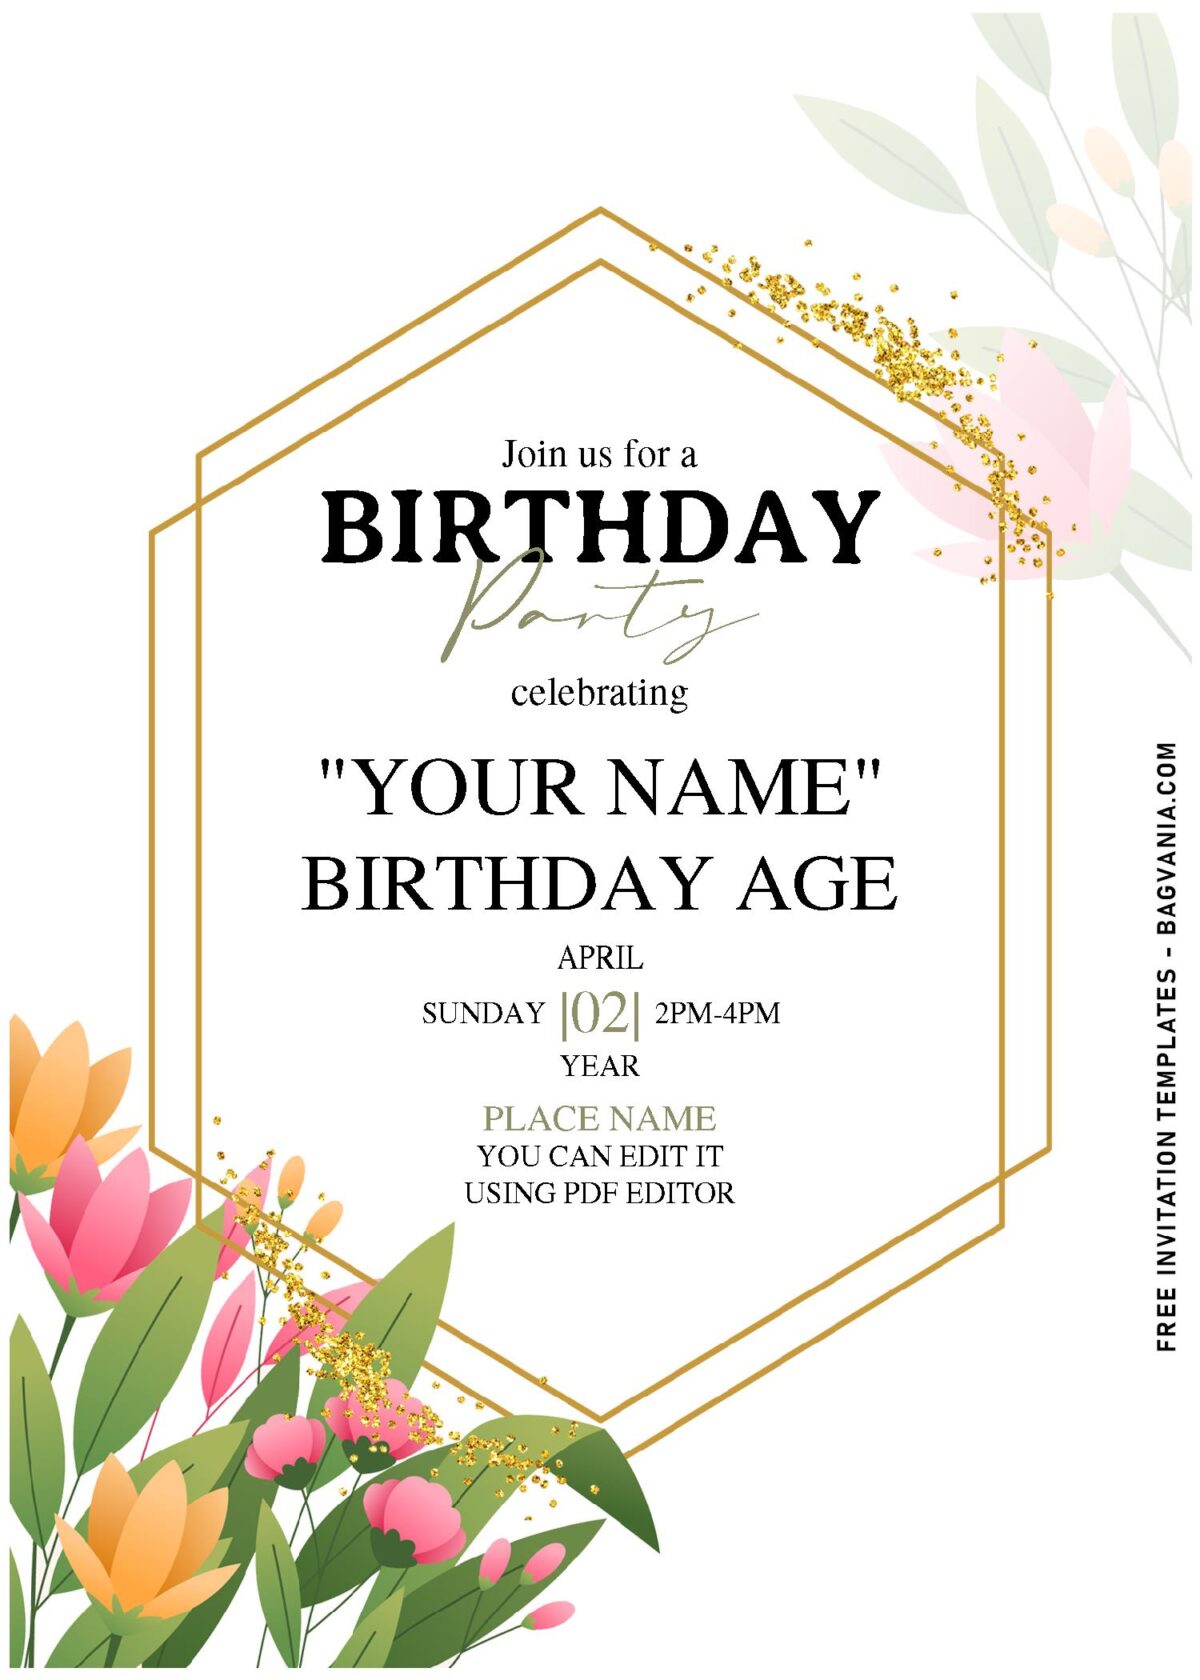 (Free Editable PDF) Geometric Gold And Floral Perfection Birthday Invitation Templates with beautiful hand drawn floral graphics